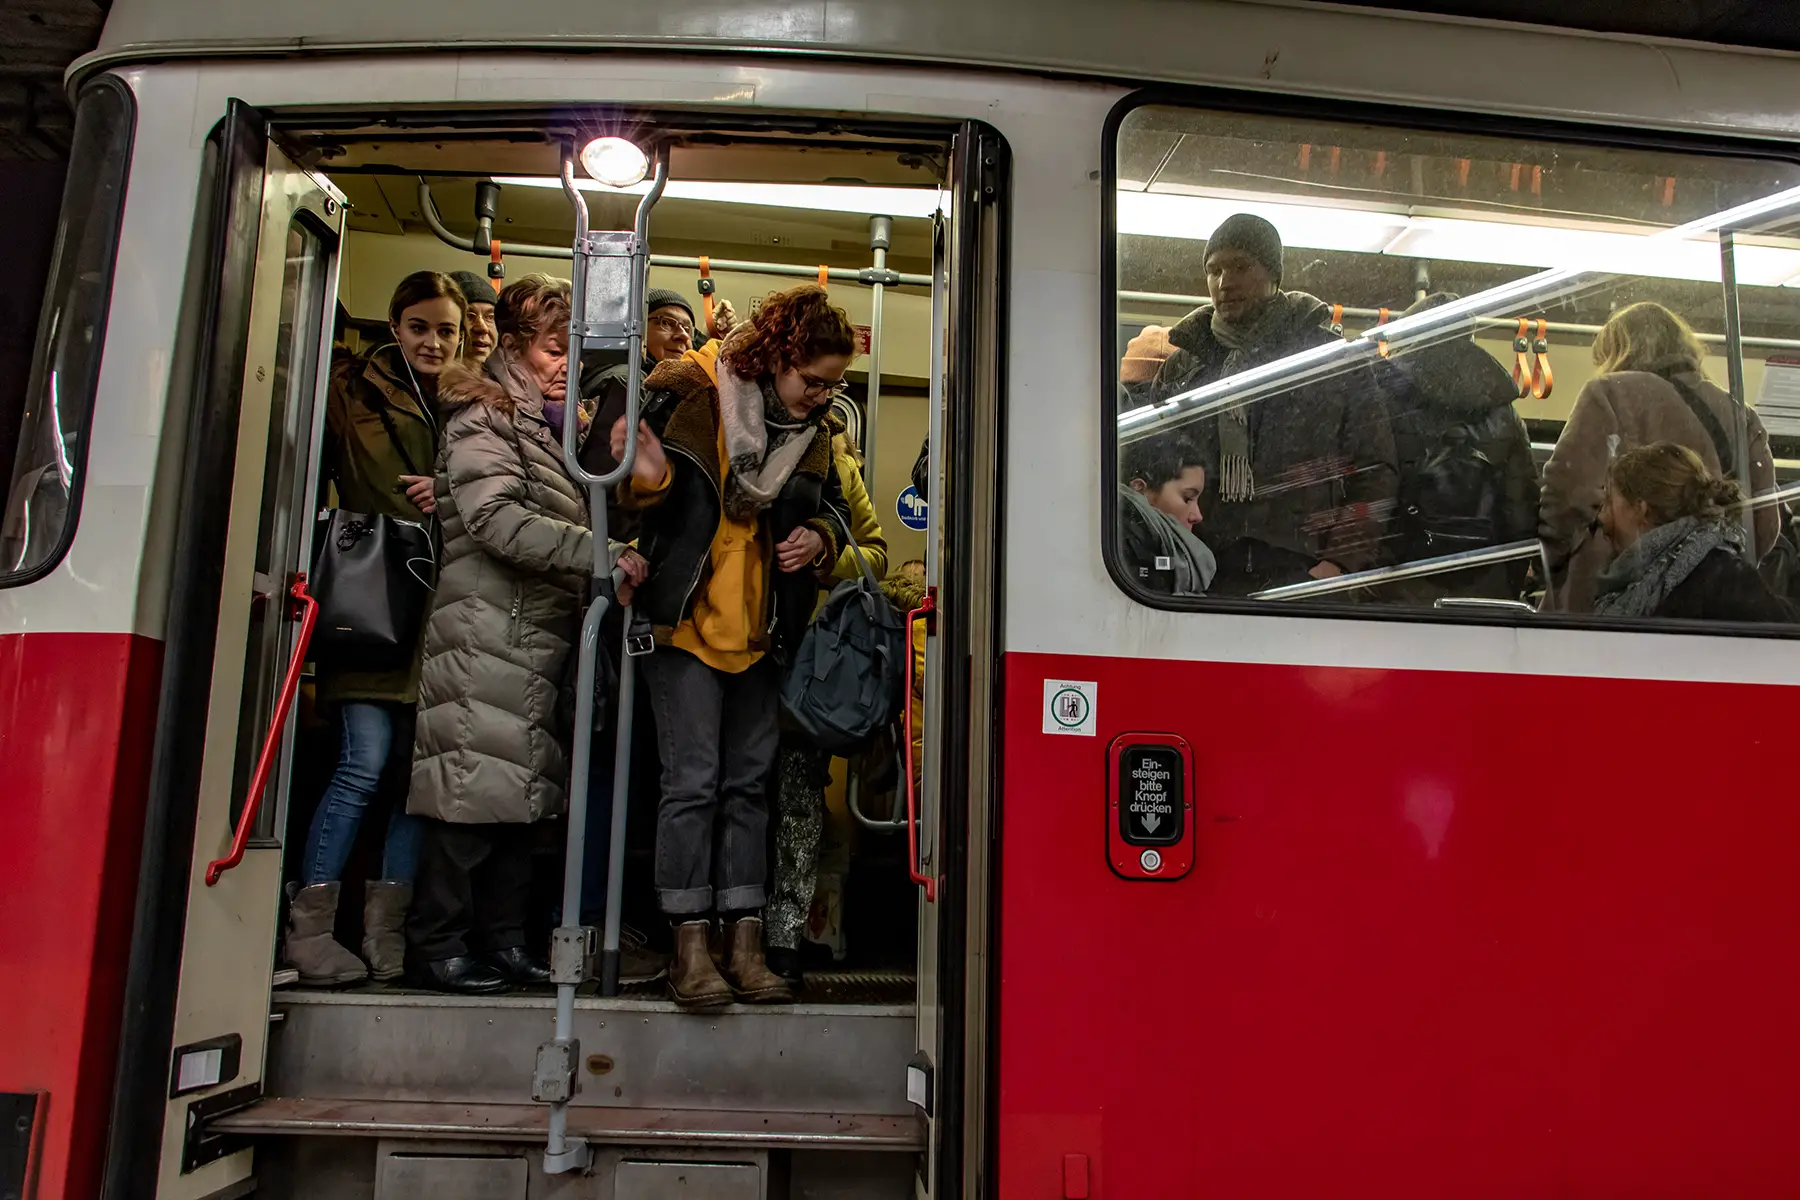 Commuters on a busy tram in Vienna